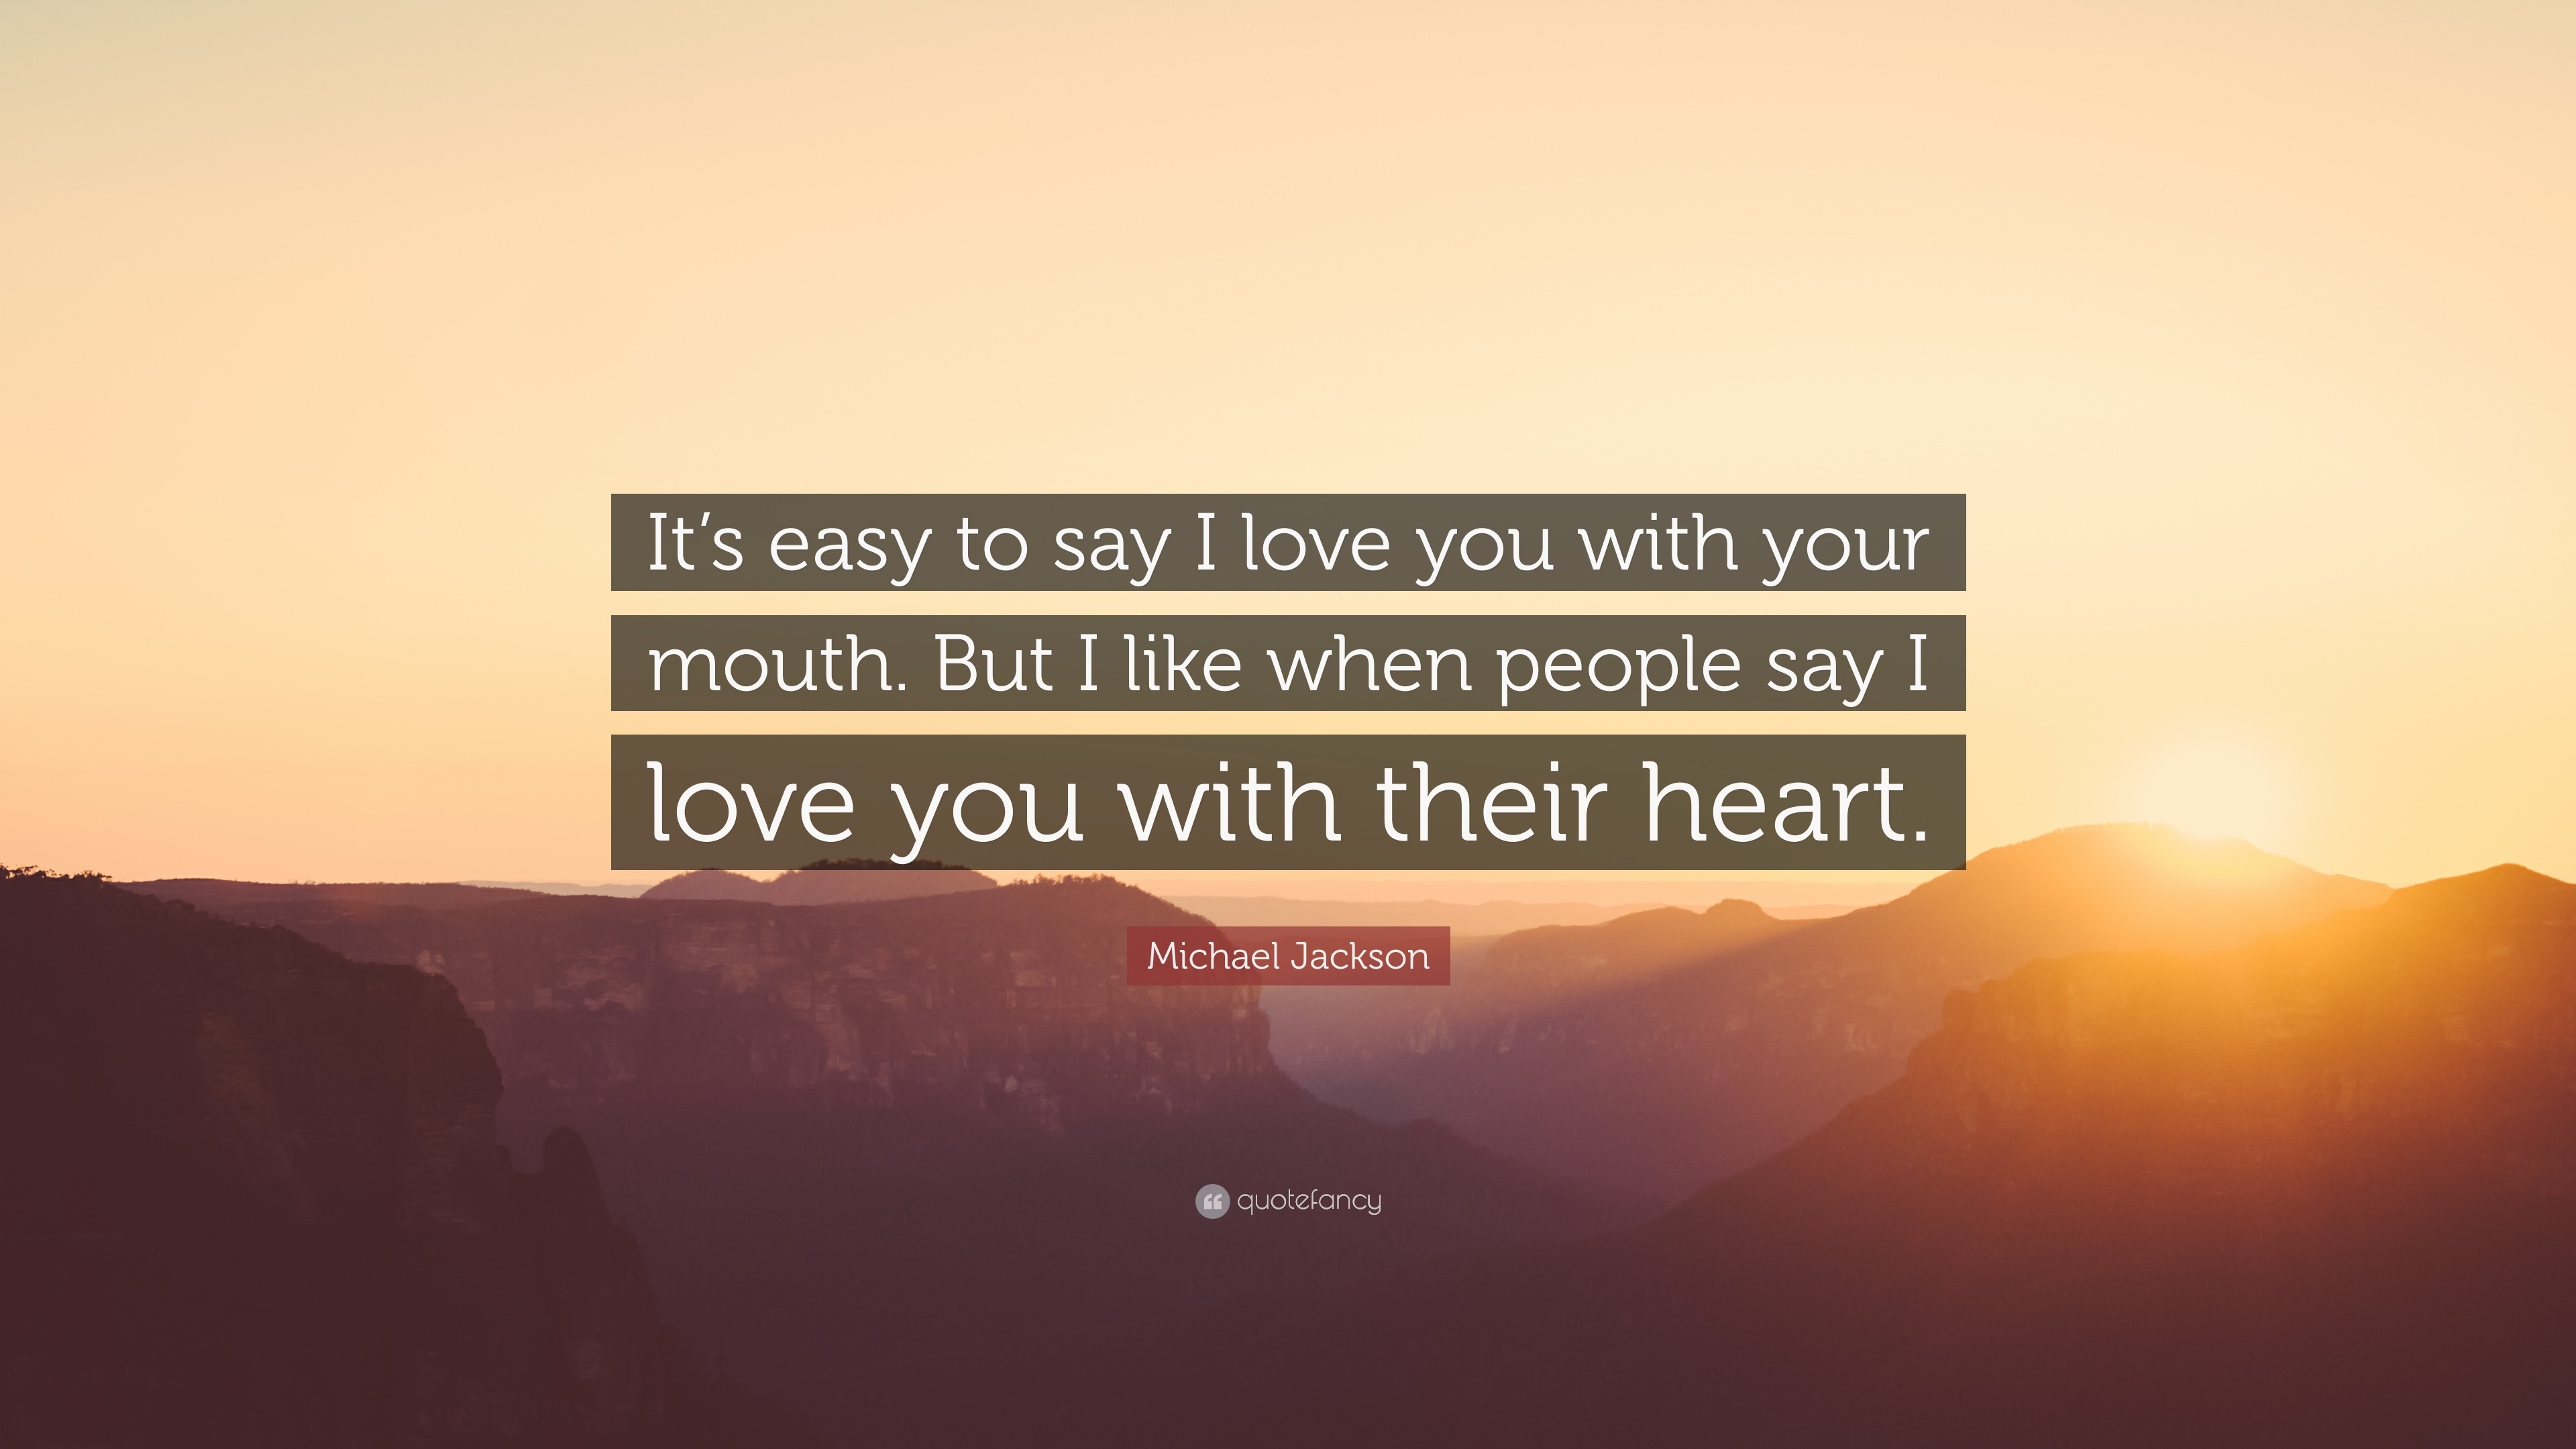 Michael Jackson Quote “It s easy to say I love you with your mouth